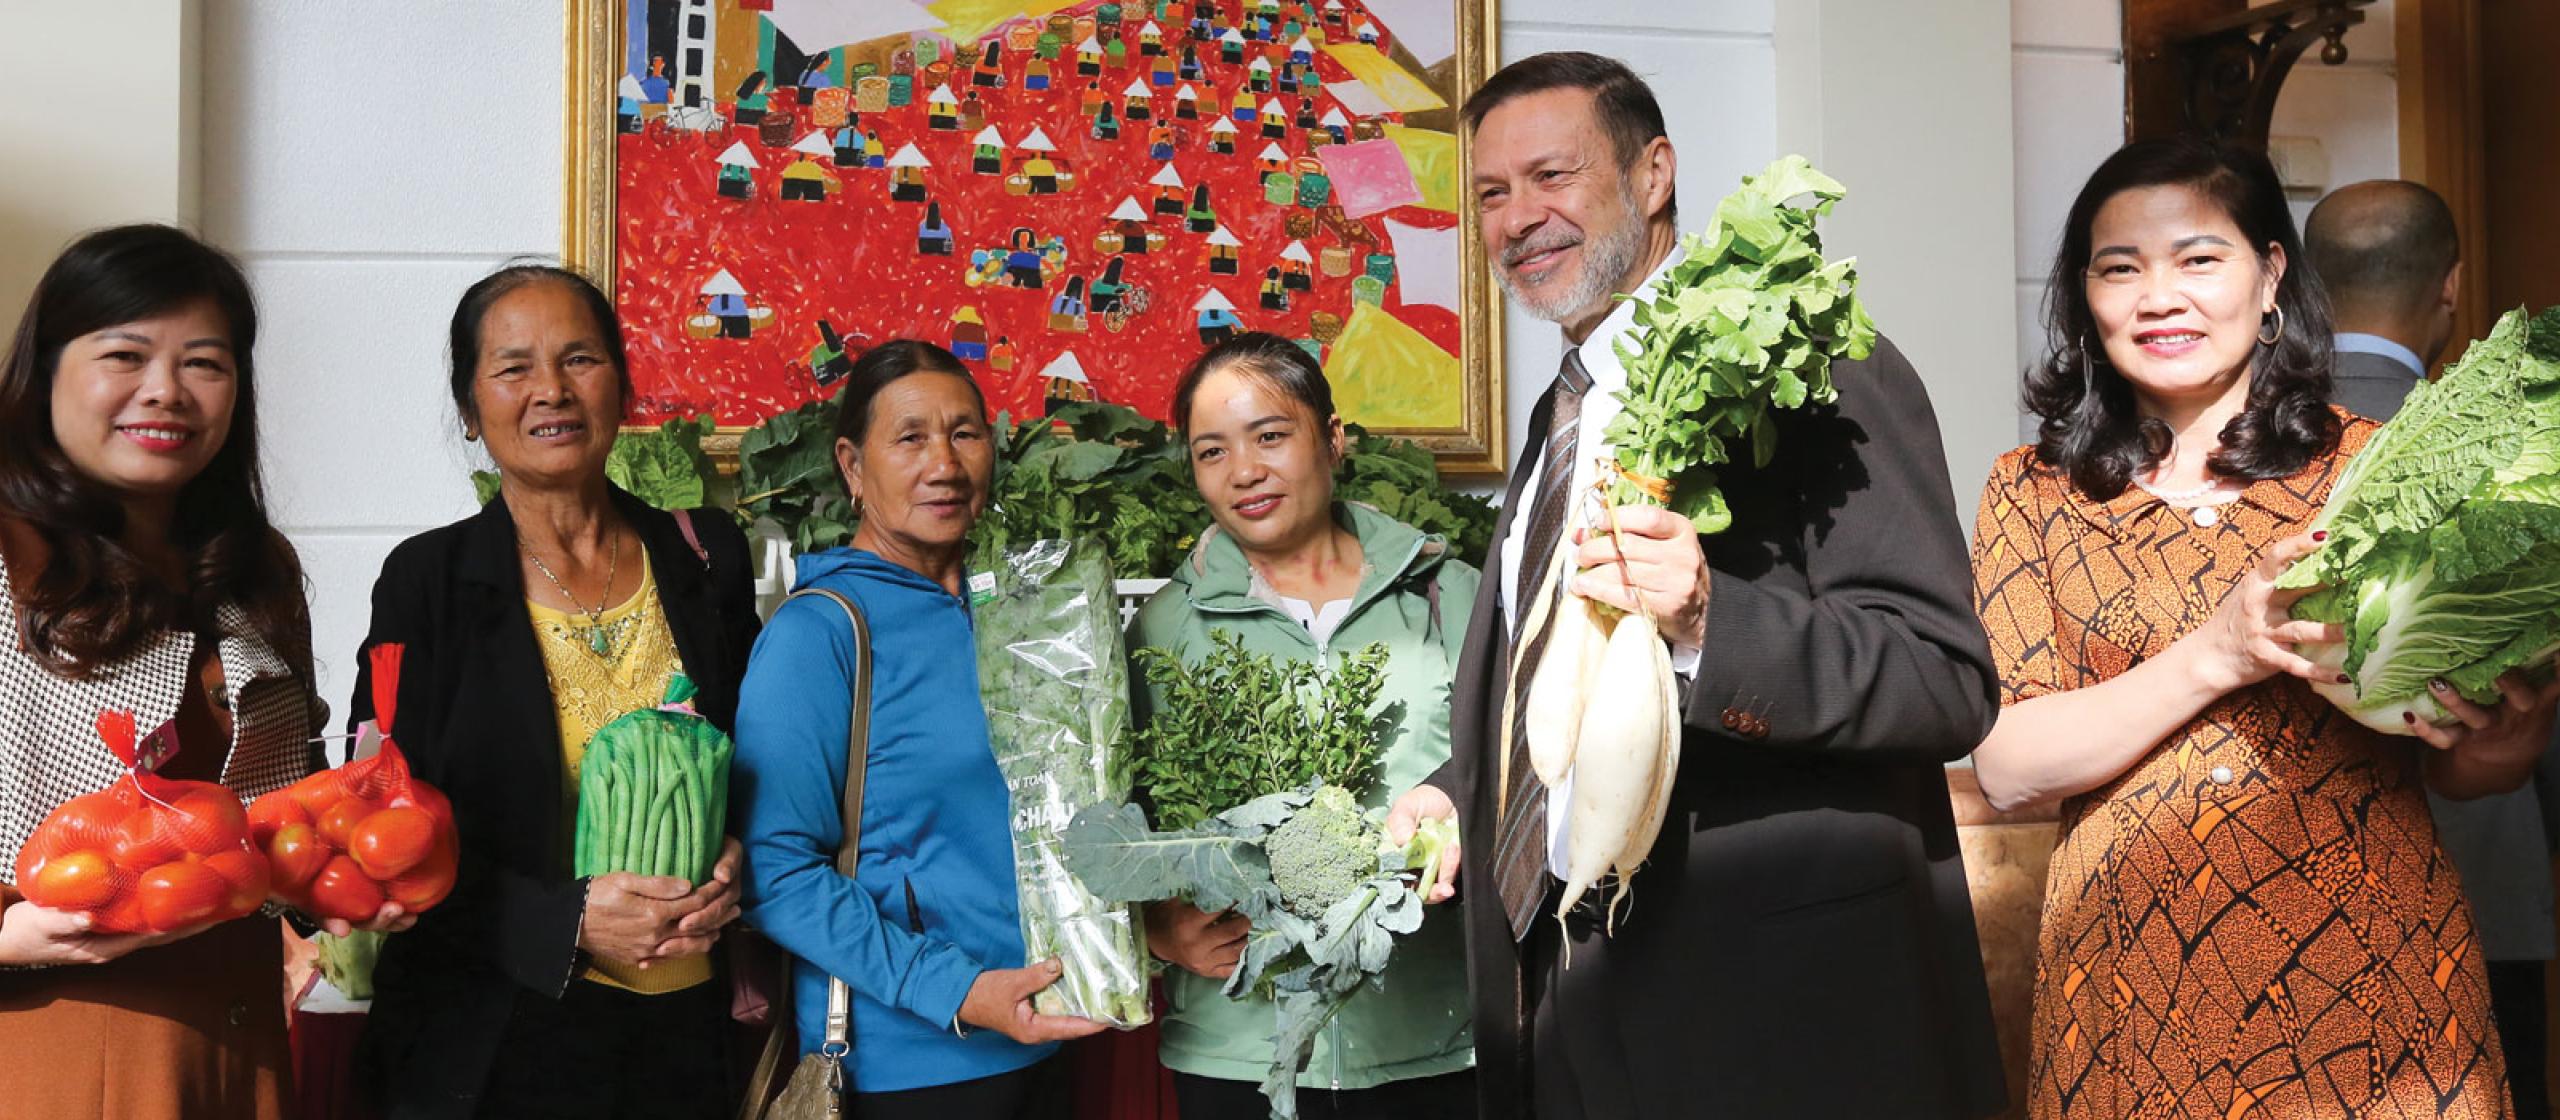 a group of farmers holding vegetable in formal dress in a building.